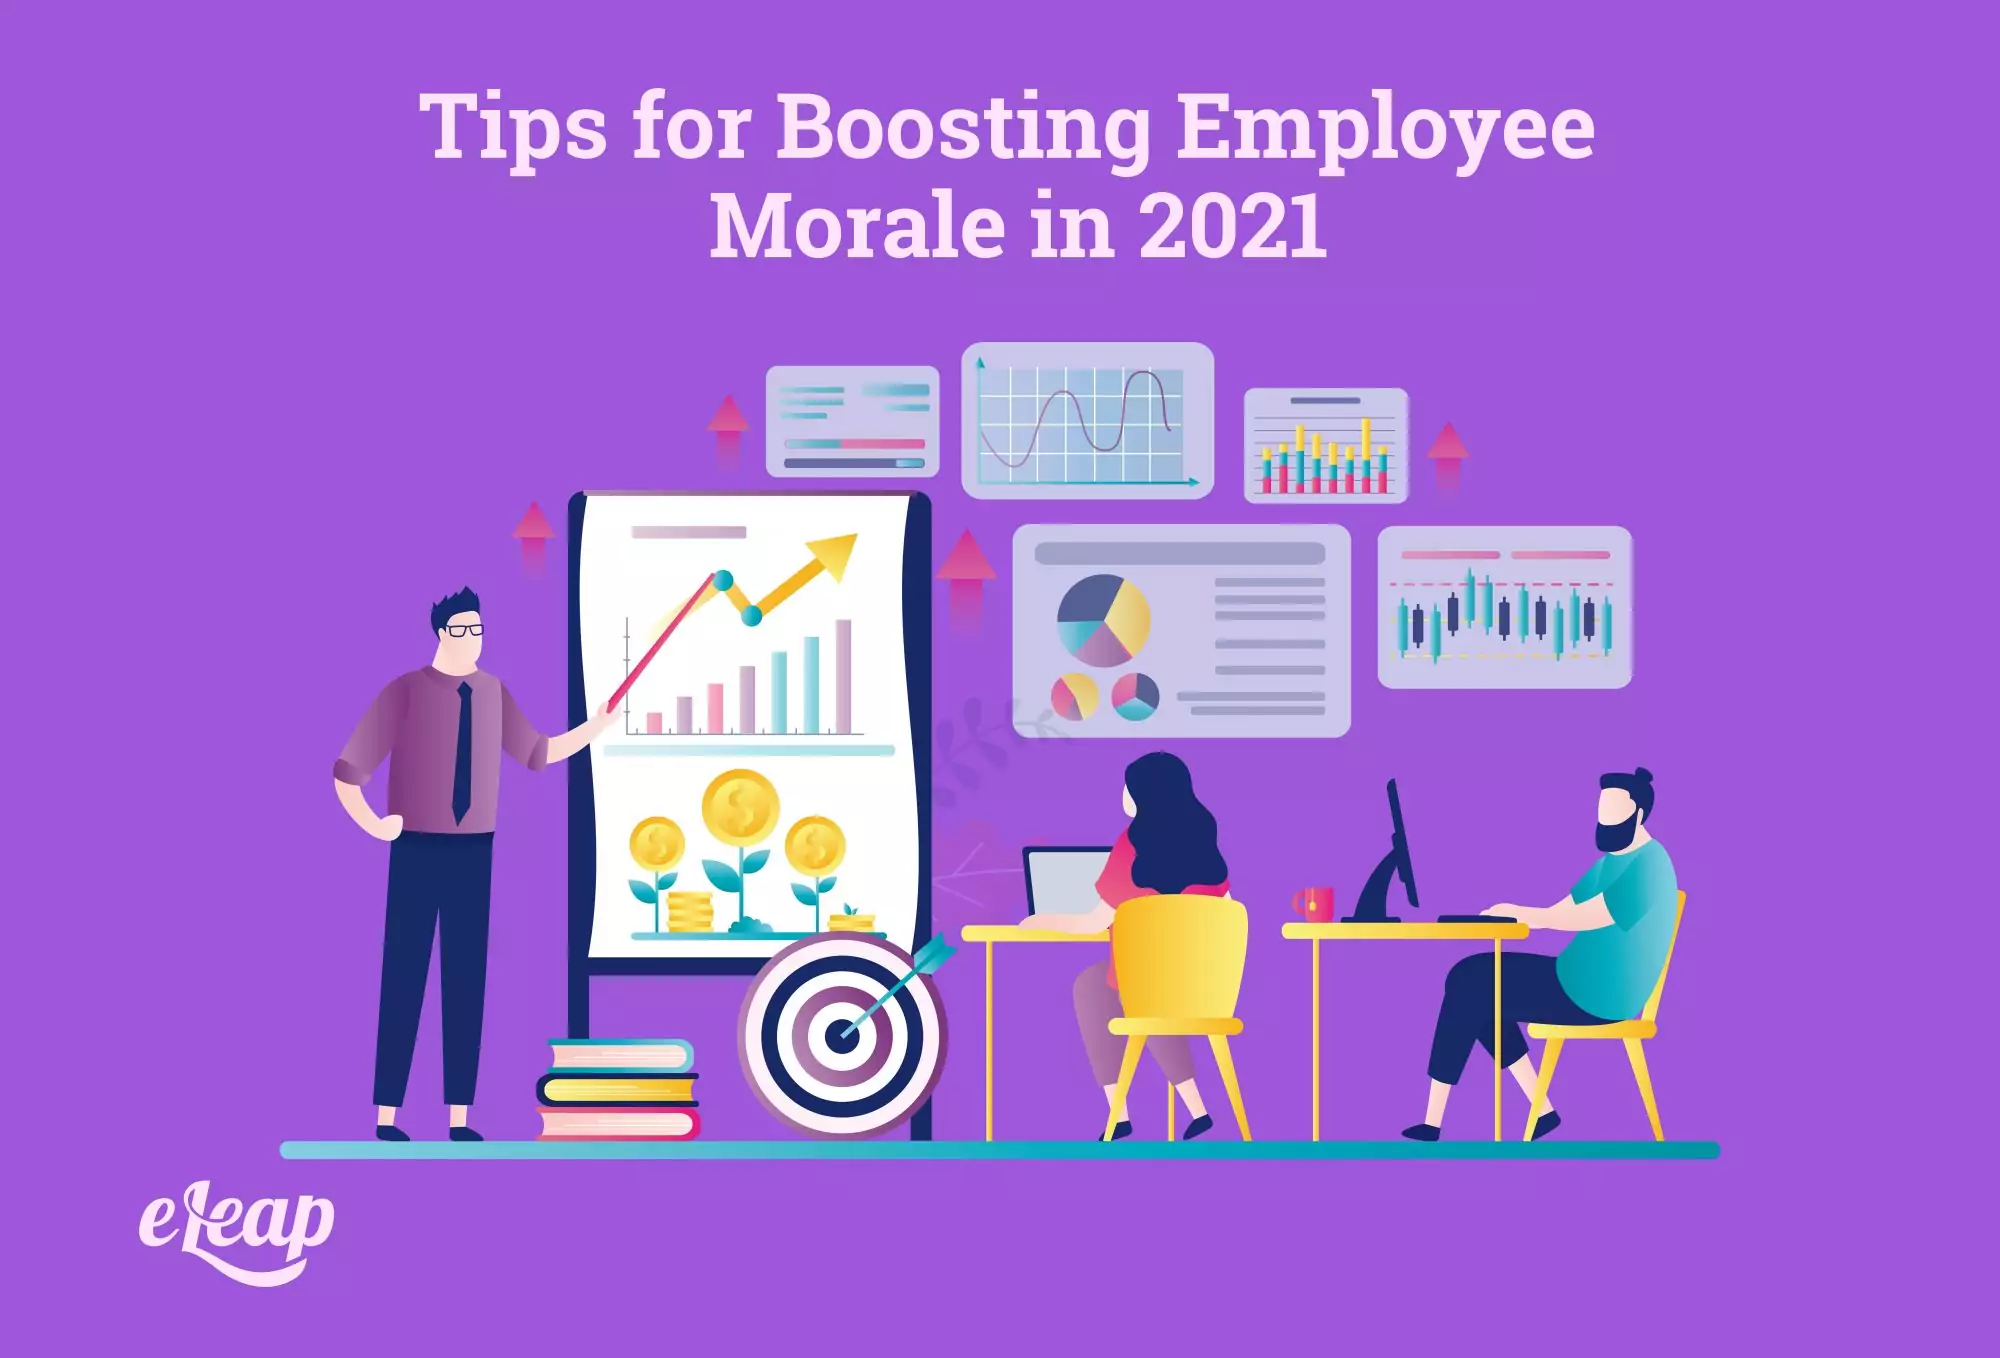 Tips for Boosting Employee Morale in 2021